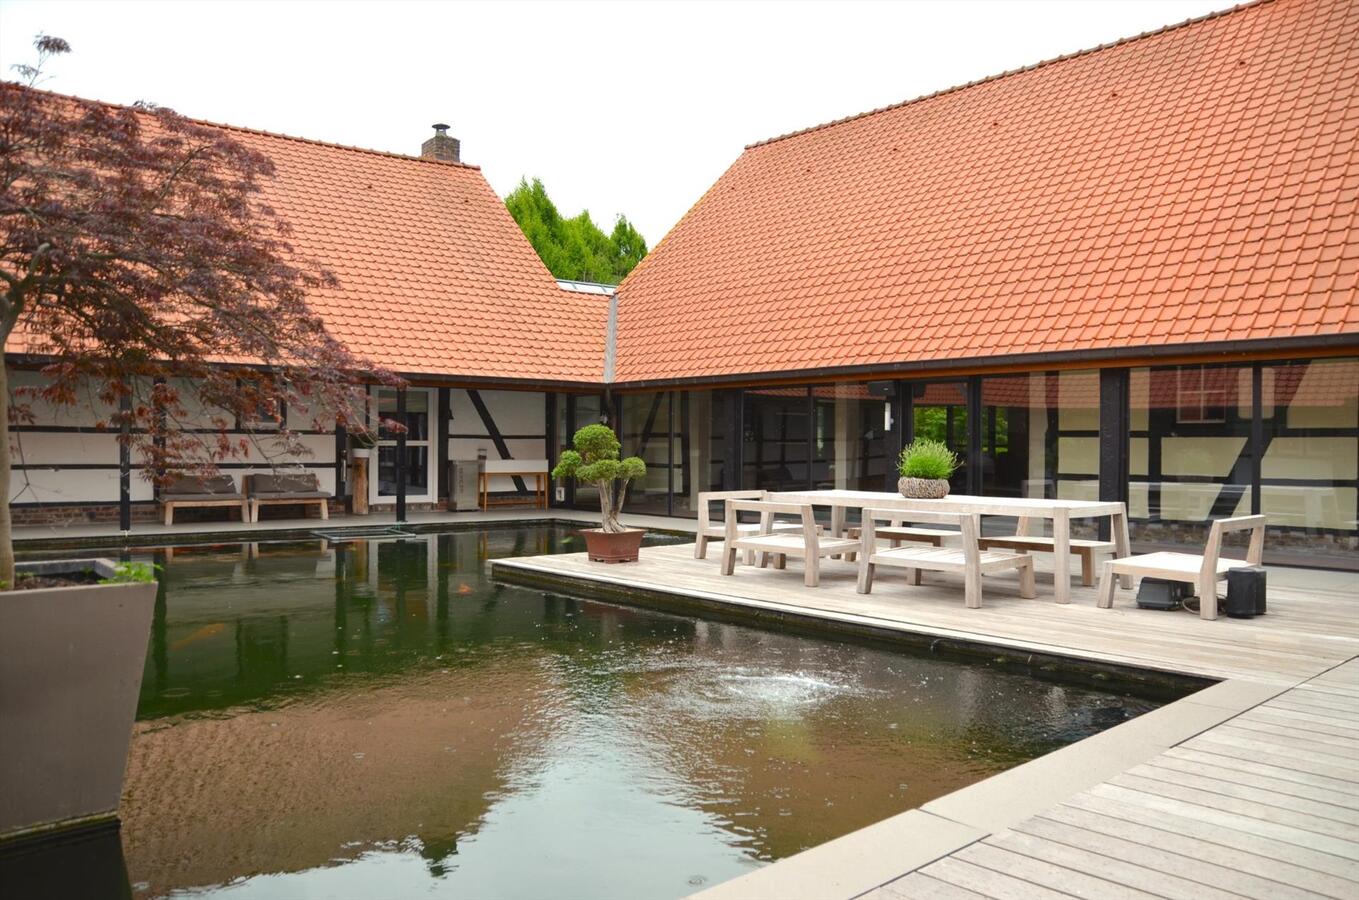 Beautiful square farm with horse accommodation, swimming pool and office space on approximately 1,15ha in Alken 